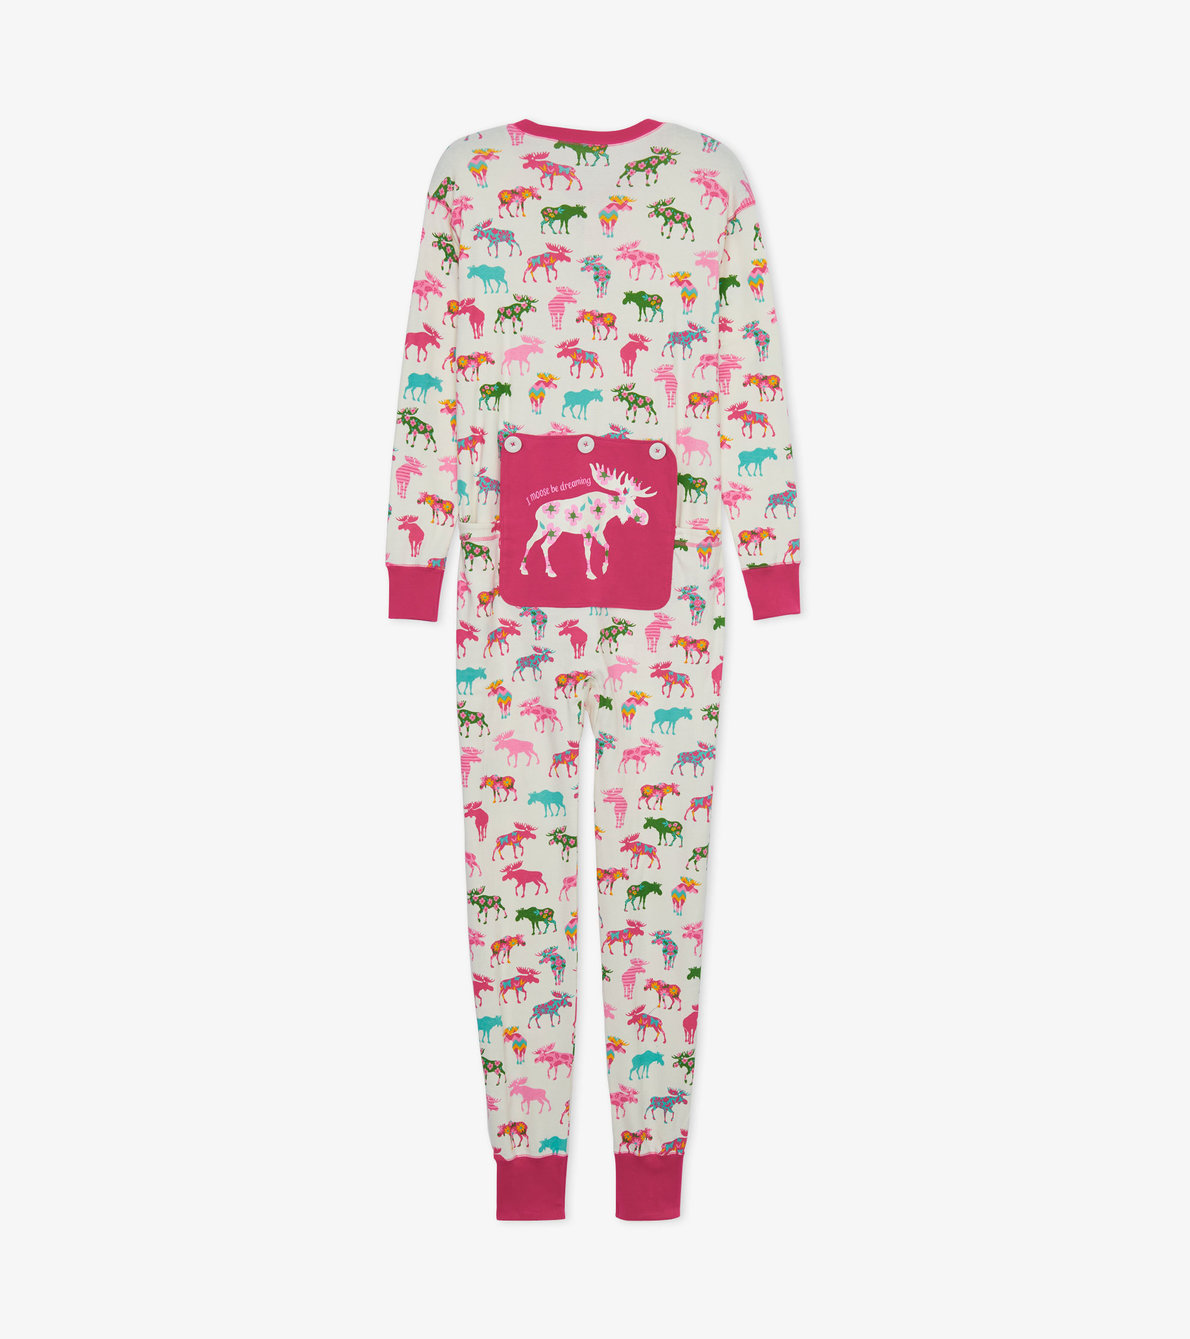 View larger image of Patterned Moose Adult Union Suit